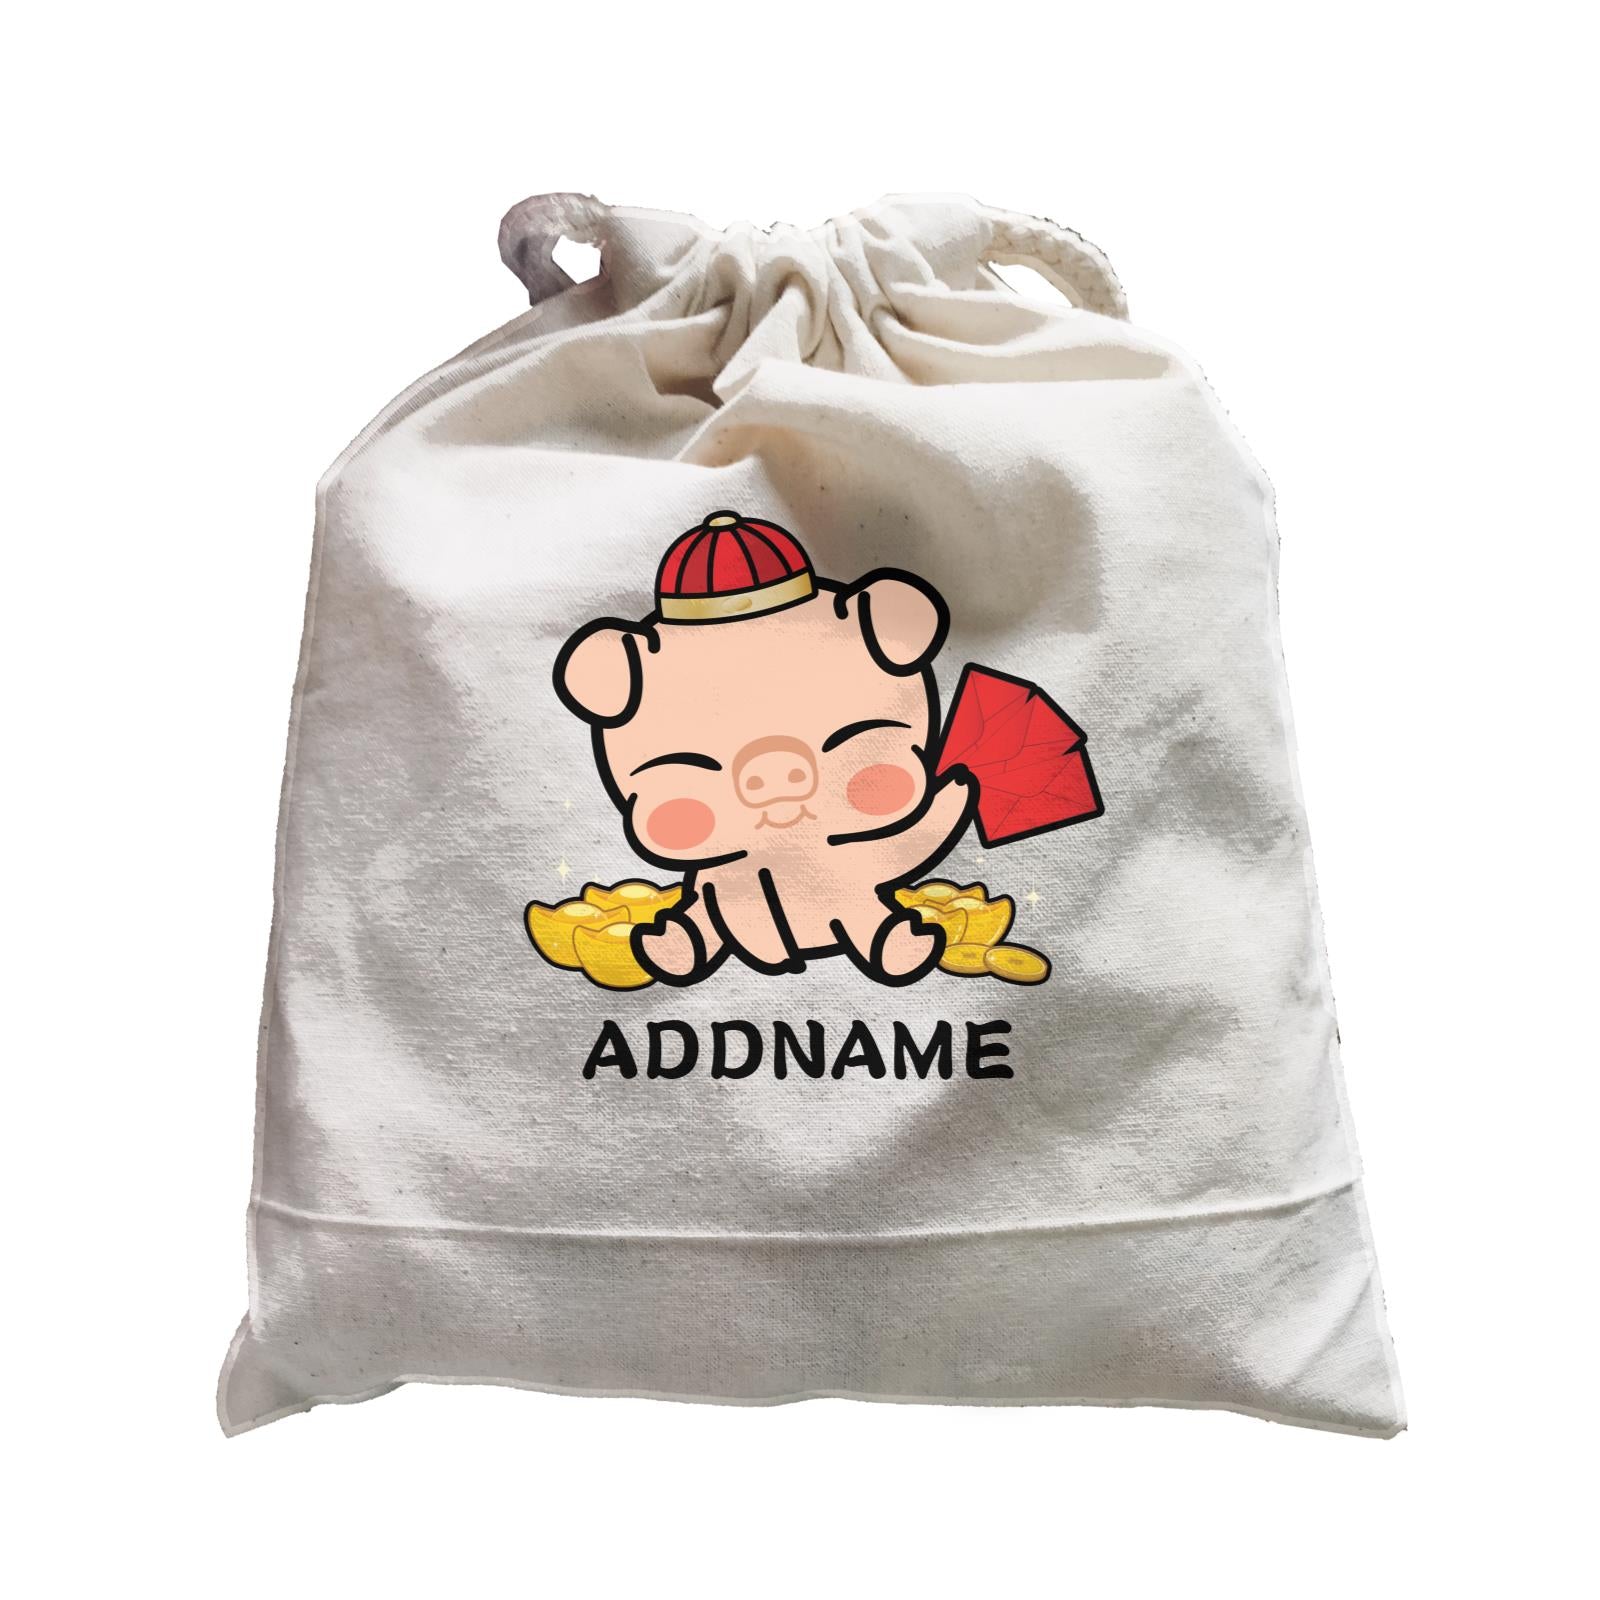 Properity Pig Baby Full Body with Red Packets And Gold Accessories Satchel